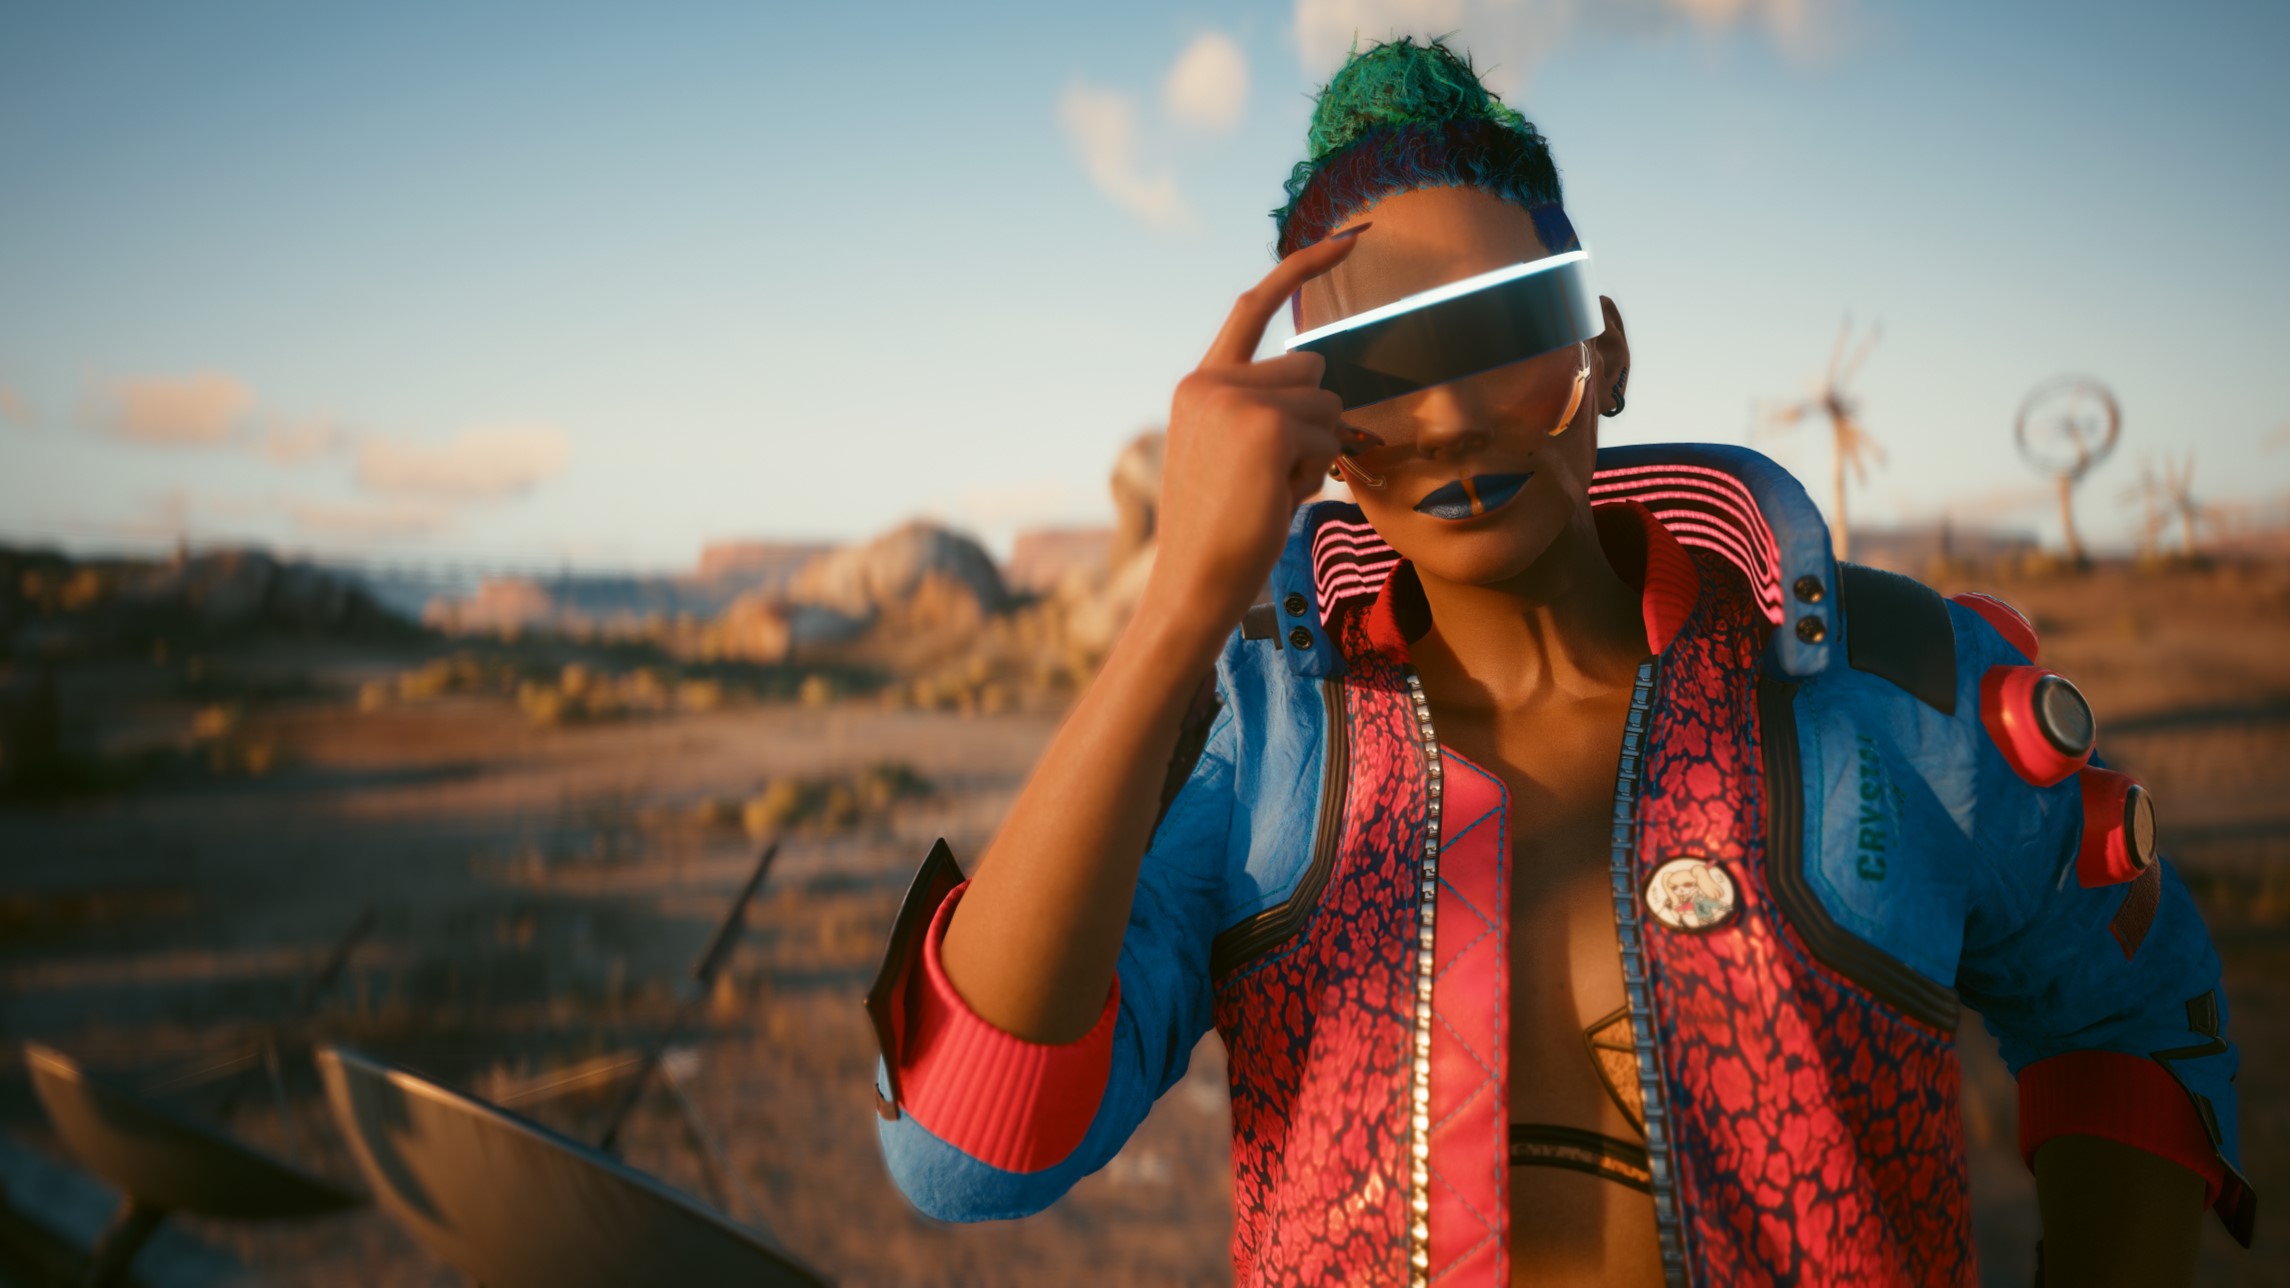 Cyberpunk 2077 quest lead says early access wouldn’t work for CDPR the way it did for Larian, and the studio prefers ‘to have a banging release where everything is as close to perfection as can be’ like Phantom Liberty’s